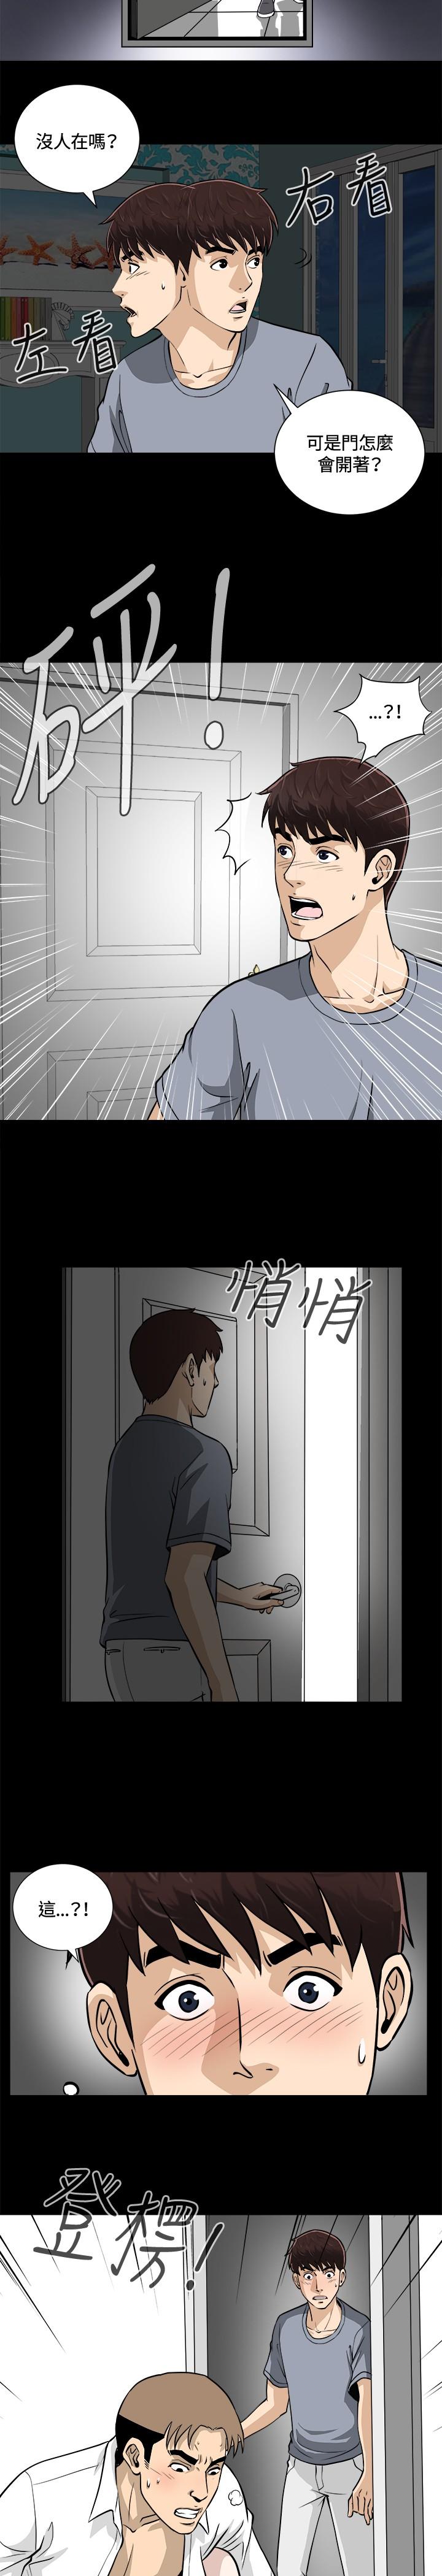 Free Hard Core Porn Dangerous game 危险性游戏 Ch.11 Consolo - Page 9